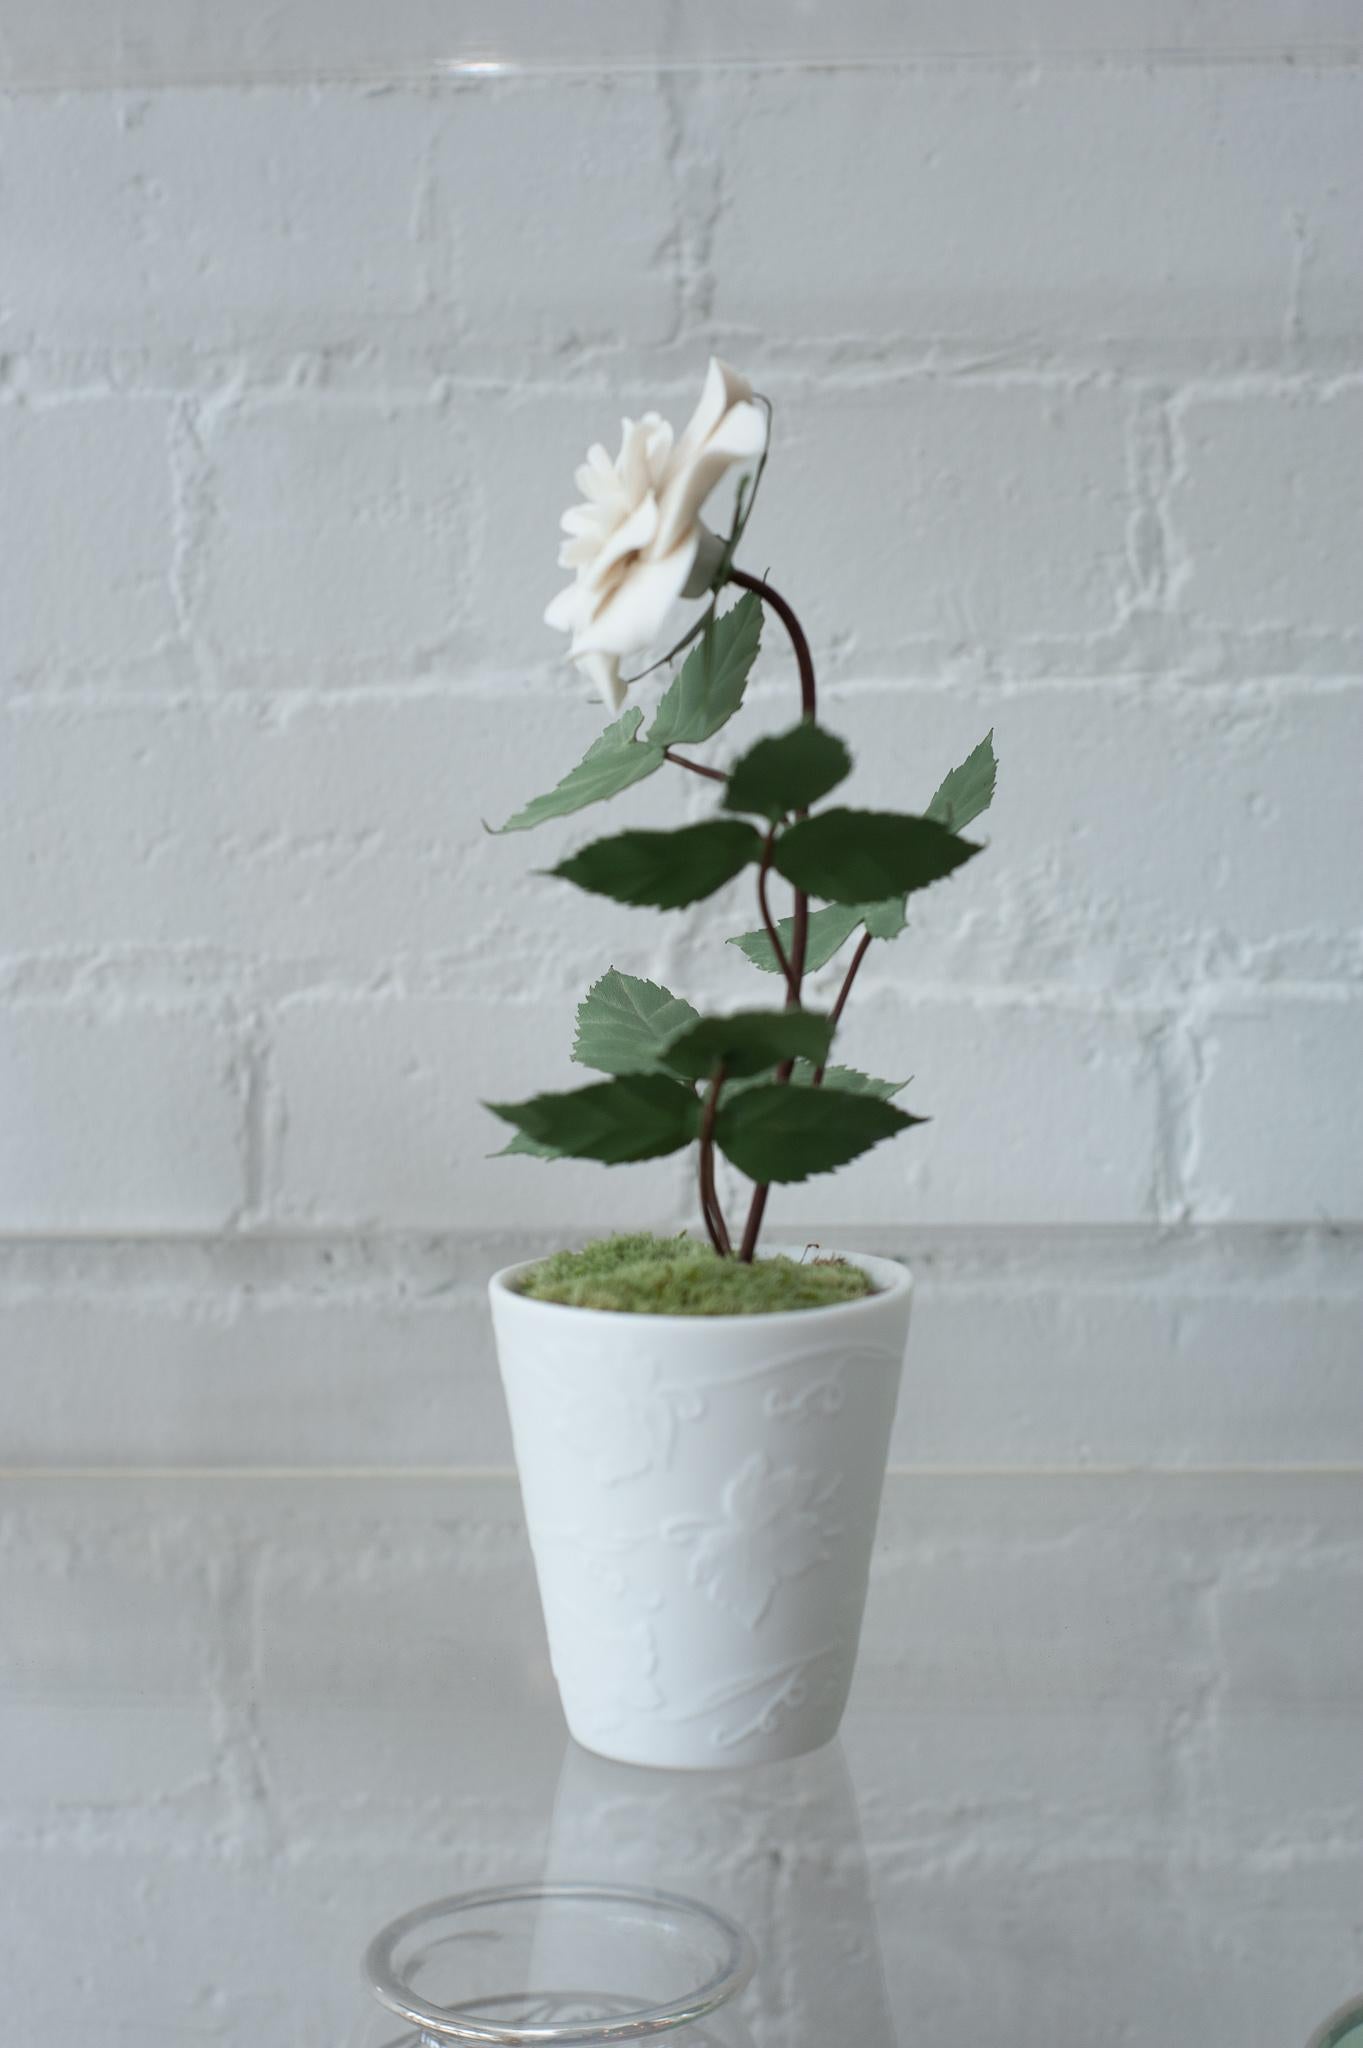 Samuel Mazy Biscuit Porcelain Rose Bush Sculpture in Biscuit Porcelain Pot In New Condition For Sale In Toronto, ON